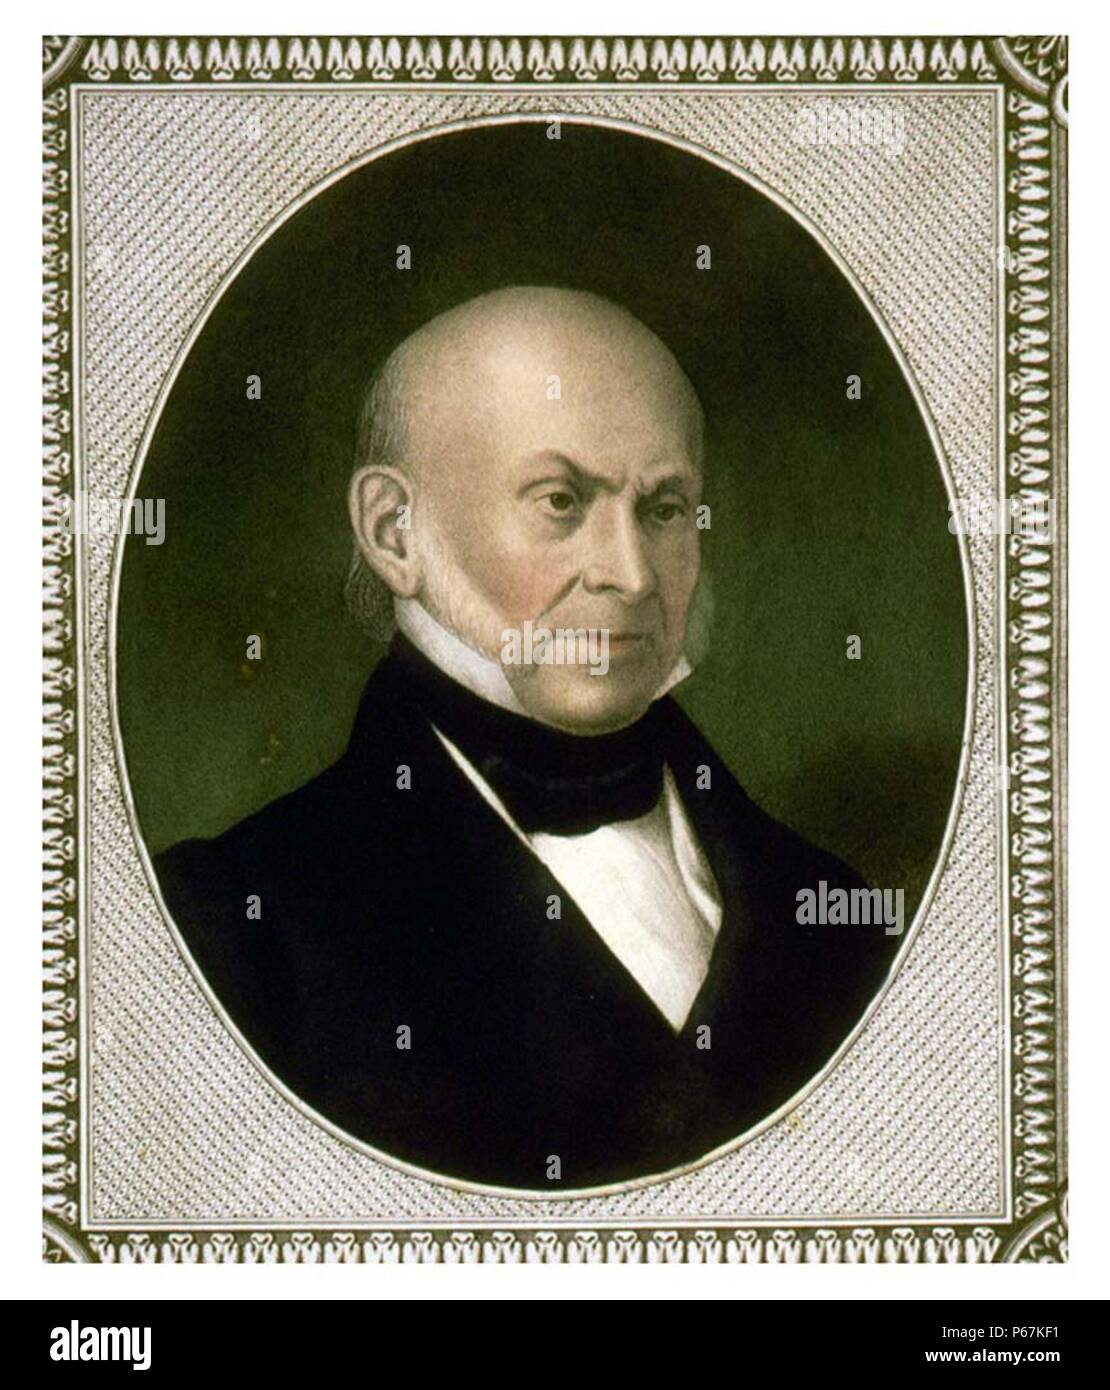 John Quincy Adams was an American statesman who served as the sixth President of the United States from 1825 to 1829. He also served as a diplomat, a Senator and member of the House of Representatives. Stock Photo